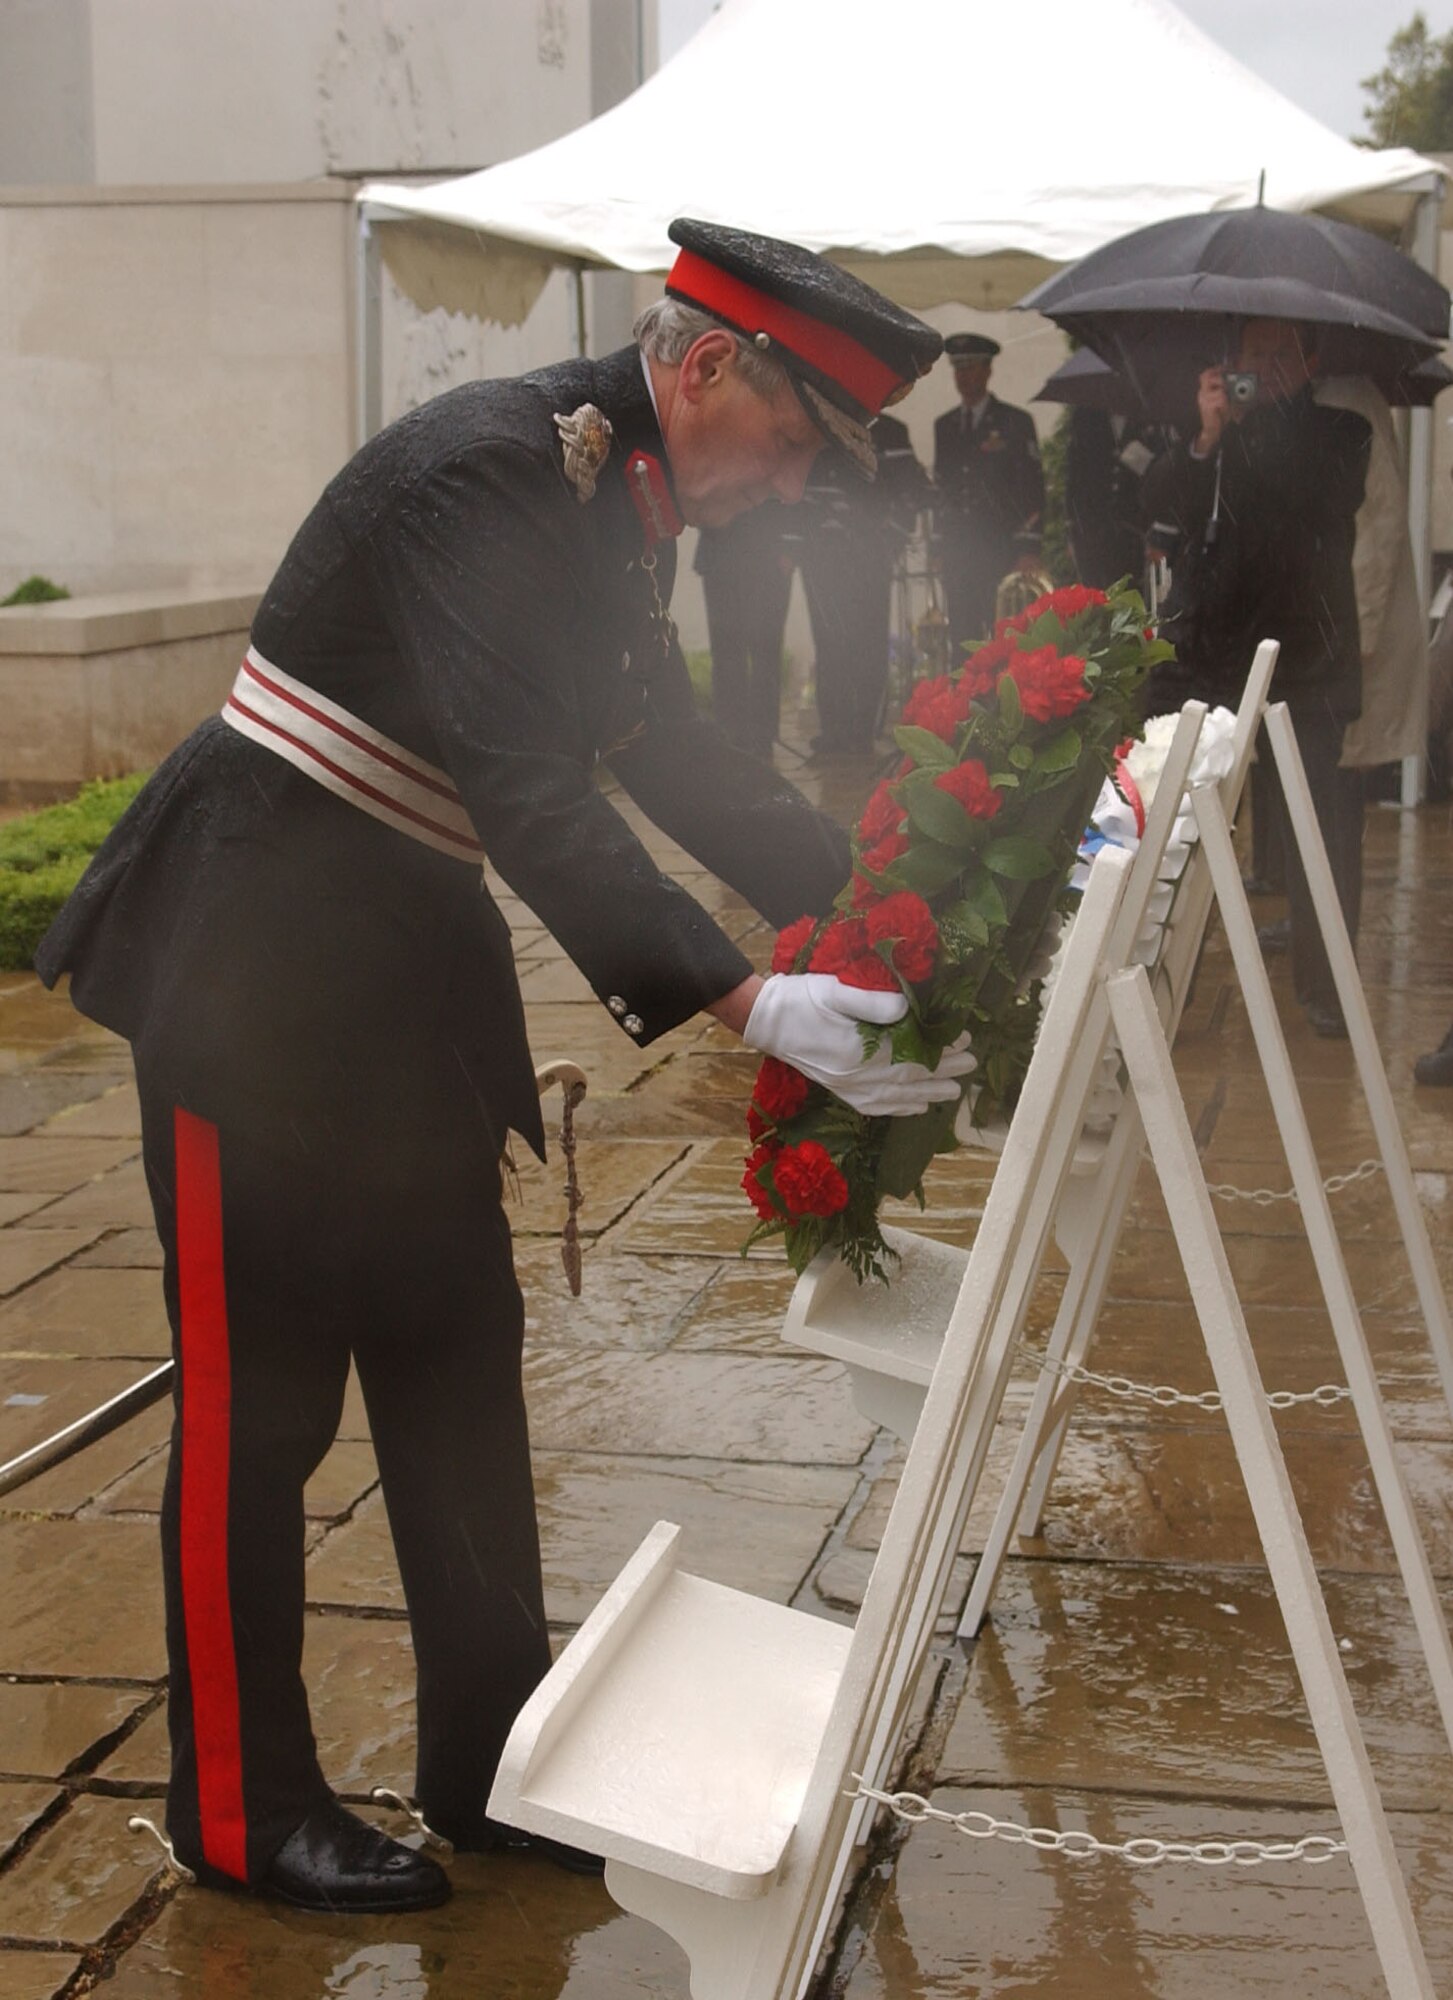 During the annual Memorial Day ceremony, Her Majesty's Lord Lieutenant Hugh Duberly of Cambridgeshire presents a wreath in front of the wall displaying the names of 5,126 Americans who gave their lives, but whose remains were never recovered or identified. (Air Force photo by Tech. Sgt. Tracy L. DeMarco)